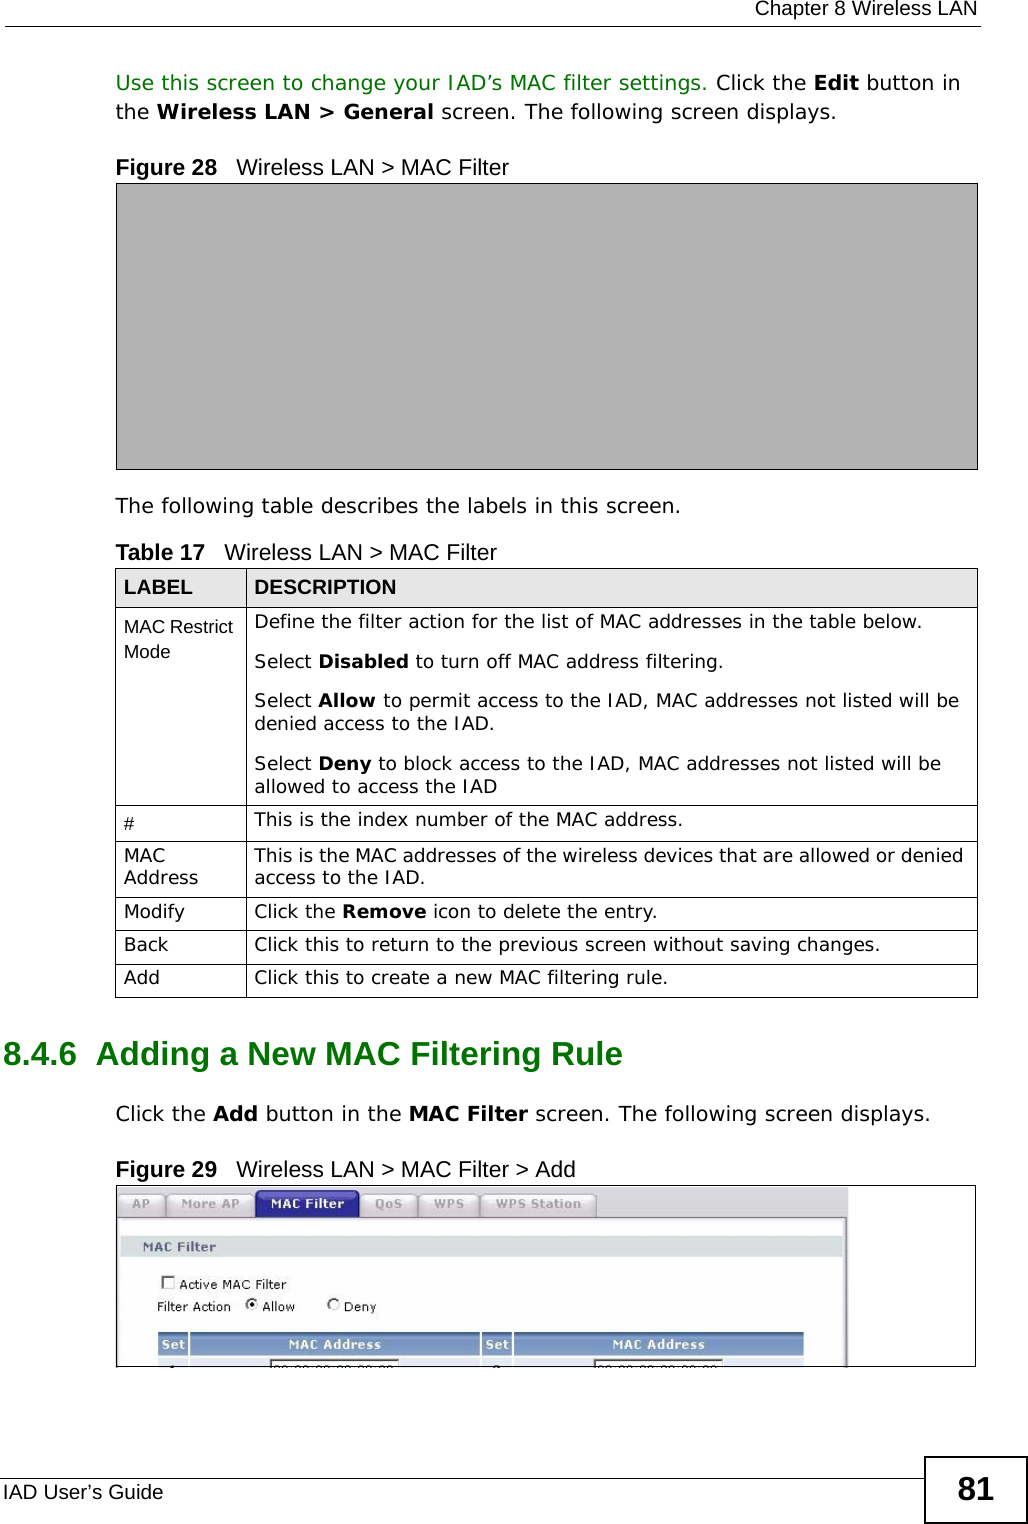  Chapter 8 Wireless LANIAD User’s Guide 81Use this screen to change your IAD’s MAC filter settings. Click the Edit button in the Wireless LAN &gt; General screen. The following screen displays.Figure 28   Wireless LAN &gt; MAC FilterThe following table describes the labels in this screen.8.4.6  Adding a New MAC Filtering Rule     Click the Add button in the MAC Filter screen. The following screen displays.Figure 29   Wireless LAN &gt; MAC Filter &gt; AddTable 17   Wireless LAN &gt; MAC FilterLABEL DESCRIPTIONMAC Restrict Mode Define the filter action for the list of MAC addresses in the table below. Select Disabled to turn off MAC address filtering.Select Allow to permit access to the IAD, MAC addresses not listed will be denied access to the IAD. Select Deny to block access to the IAD, MAC addresses not listed will be allowed to access the IAD #This is the index number of the MAC address.MAC Address This is the MAC addresses of the wireless devices that are allowed or denied access to the IAD.Modify Click the Remove icon to delete the entry.Back Click this to return to the previous screen without saving changes.Add Click this to create a new MAC filtering rule.